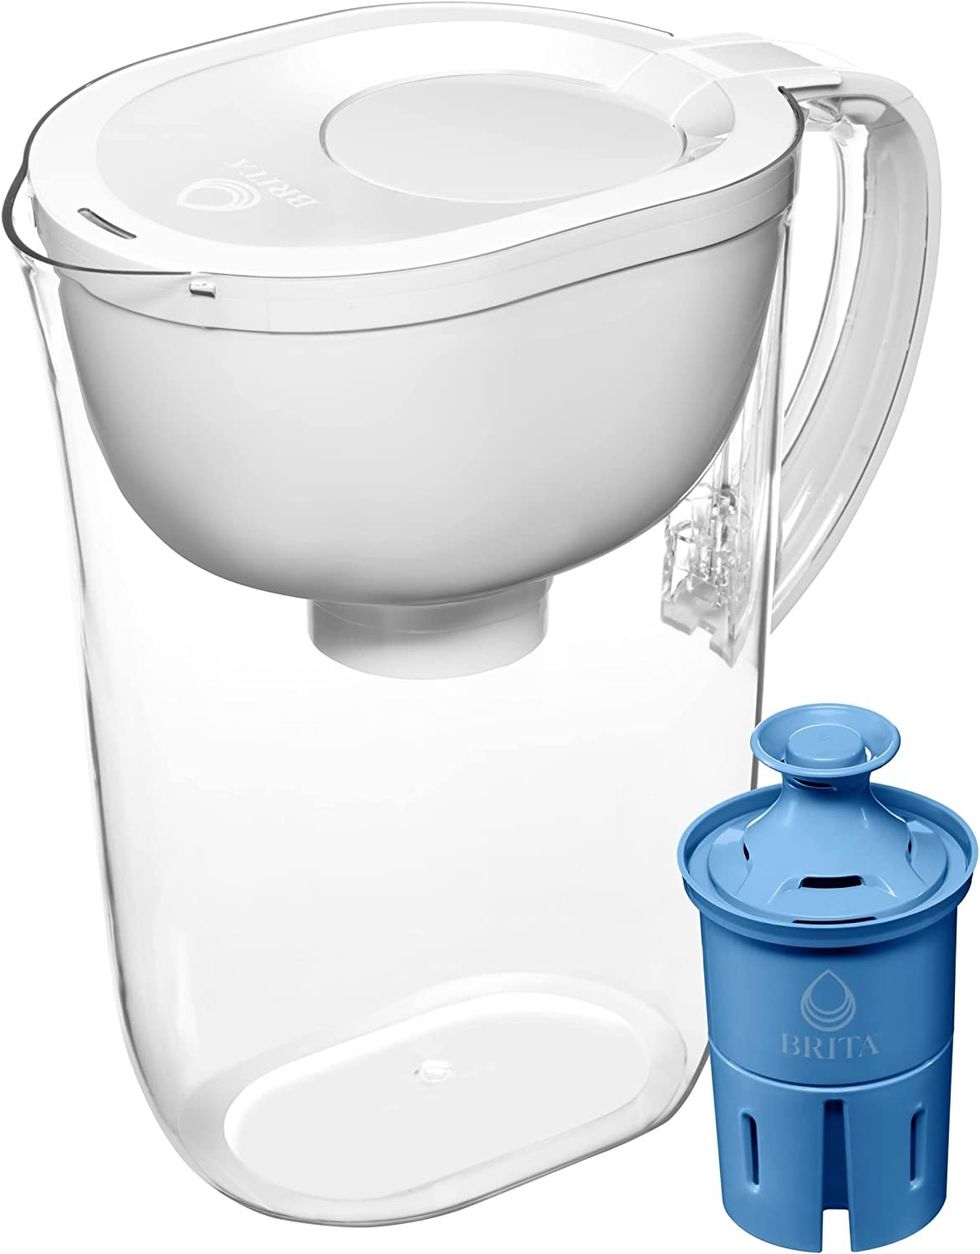 Brita Large Water Filter Pitcher for Tap and Drinking Water